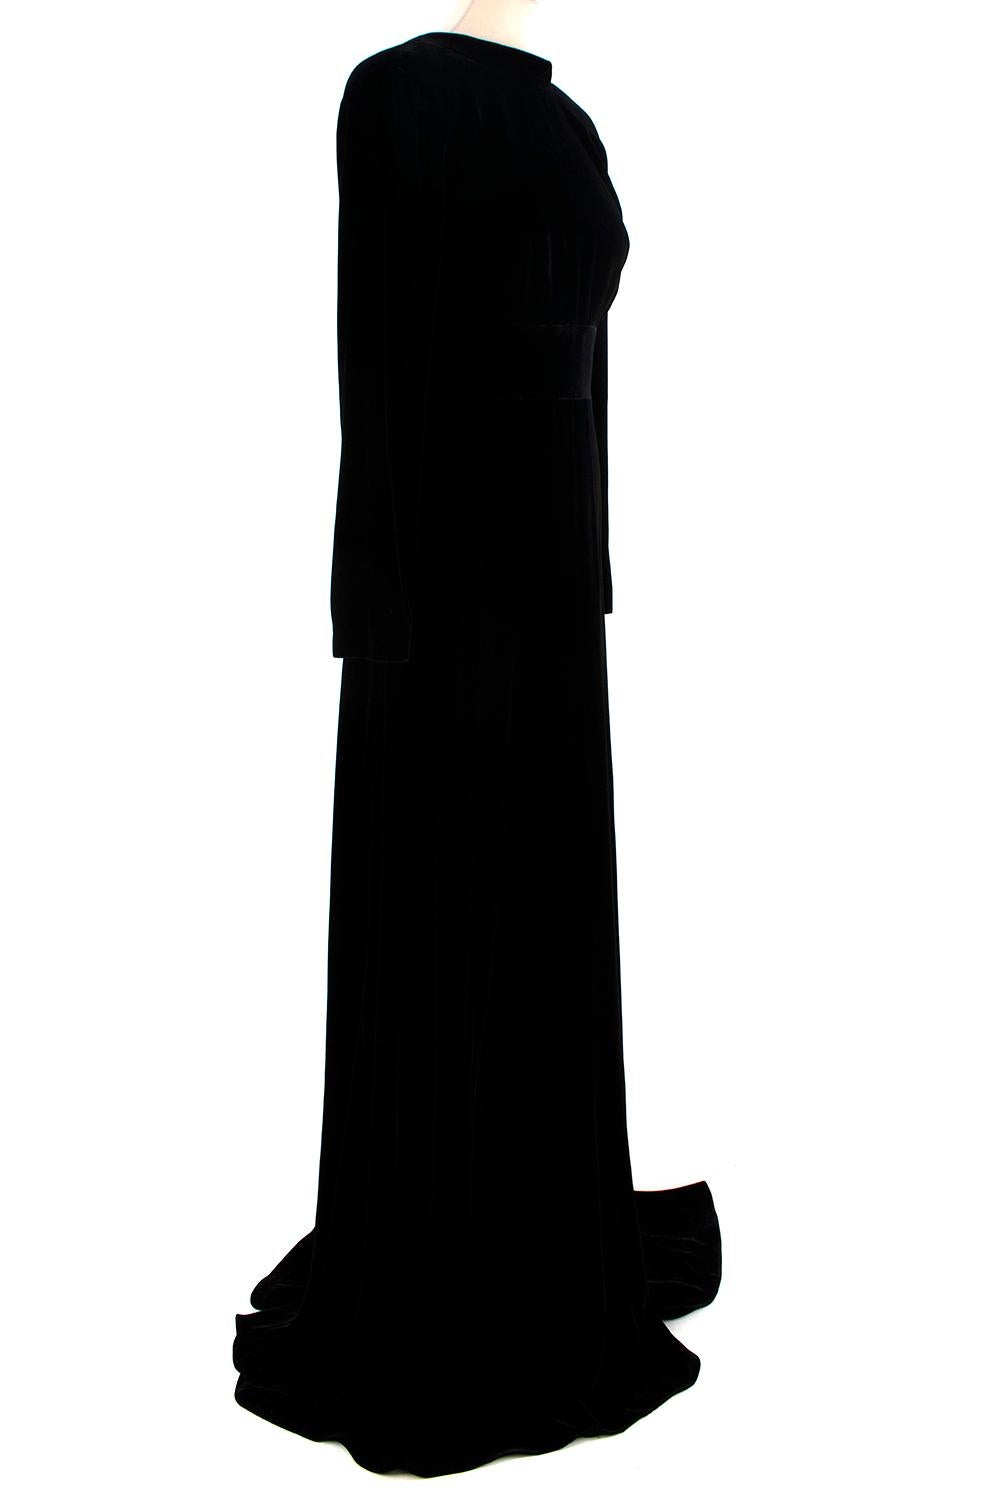 La Mania Black Velvet Low Back Gown 

- Stunning inky black velvet gown, with a sumptuous plush handle and incredible drape on the body
- A high mock neck, and simply cut bodice, giving way into a defined waist and flowing floor-length skirt with